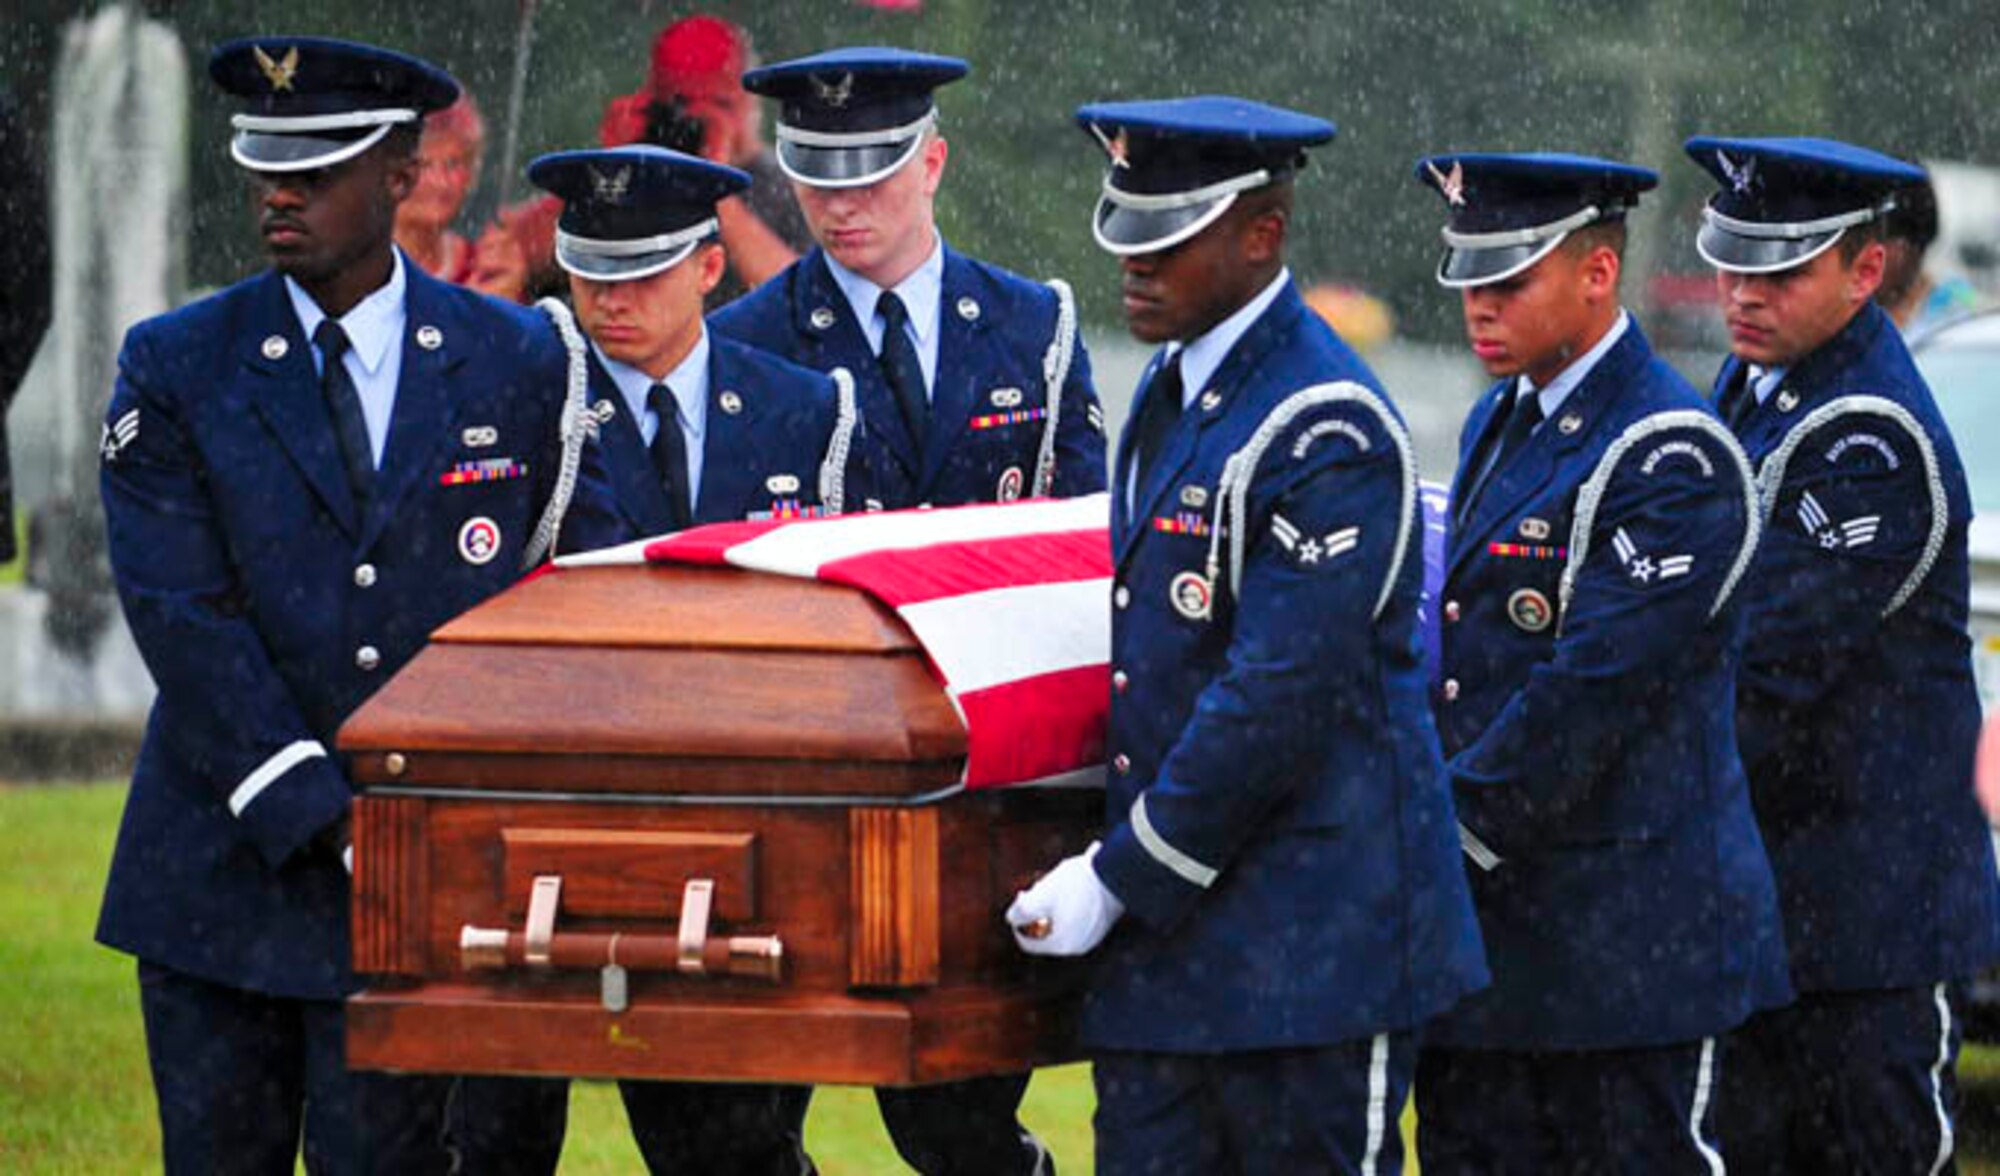 Capt. Robert Turnbull Sr.’s remains are carried by members of the Tyndall Air Force Base Honor Guard during his funeral July 19, 2014, at Barnetts Creek Baptist Church Cemetery, Thomas County, Ga. Trunbull was one of 52 service members lost during a C-124 Globemaster crash in Alaska in 1952. (U.S. Air Force photo/Airman 1st Class Dustin Mullen)